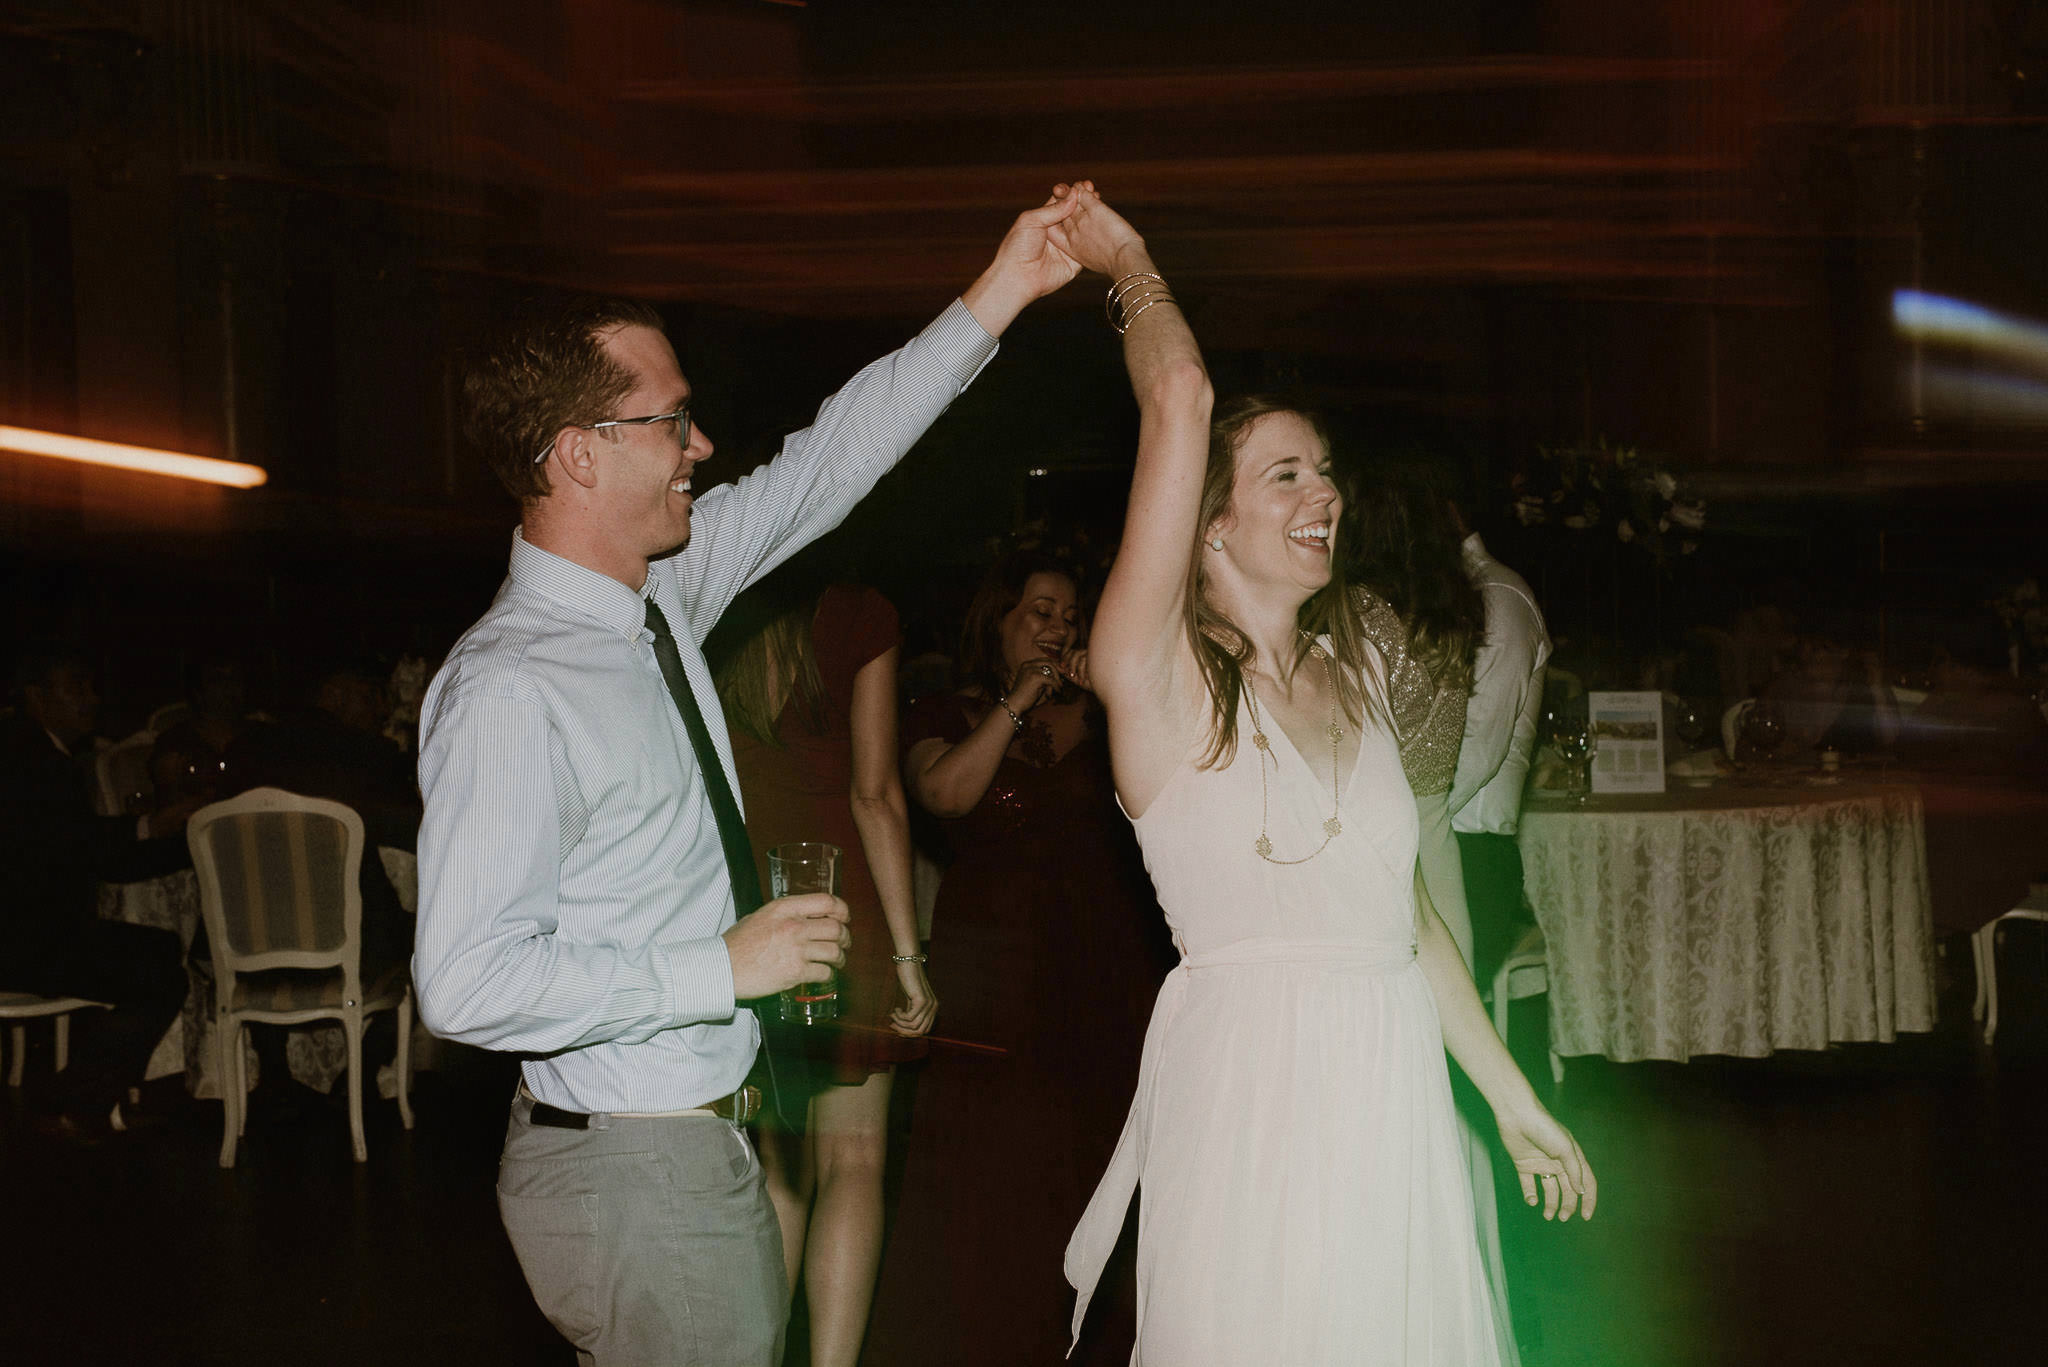 dancing moves on the dance floor